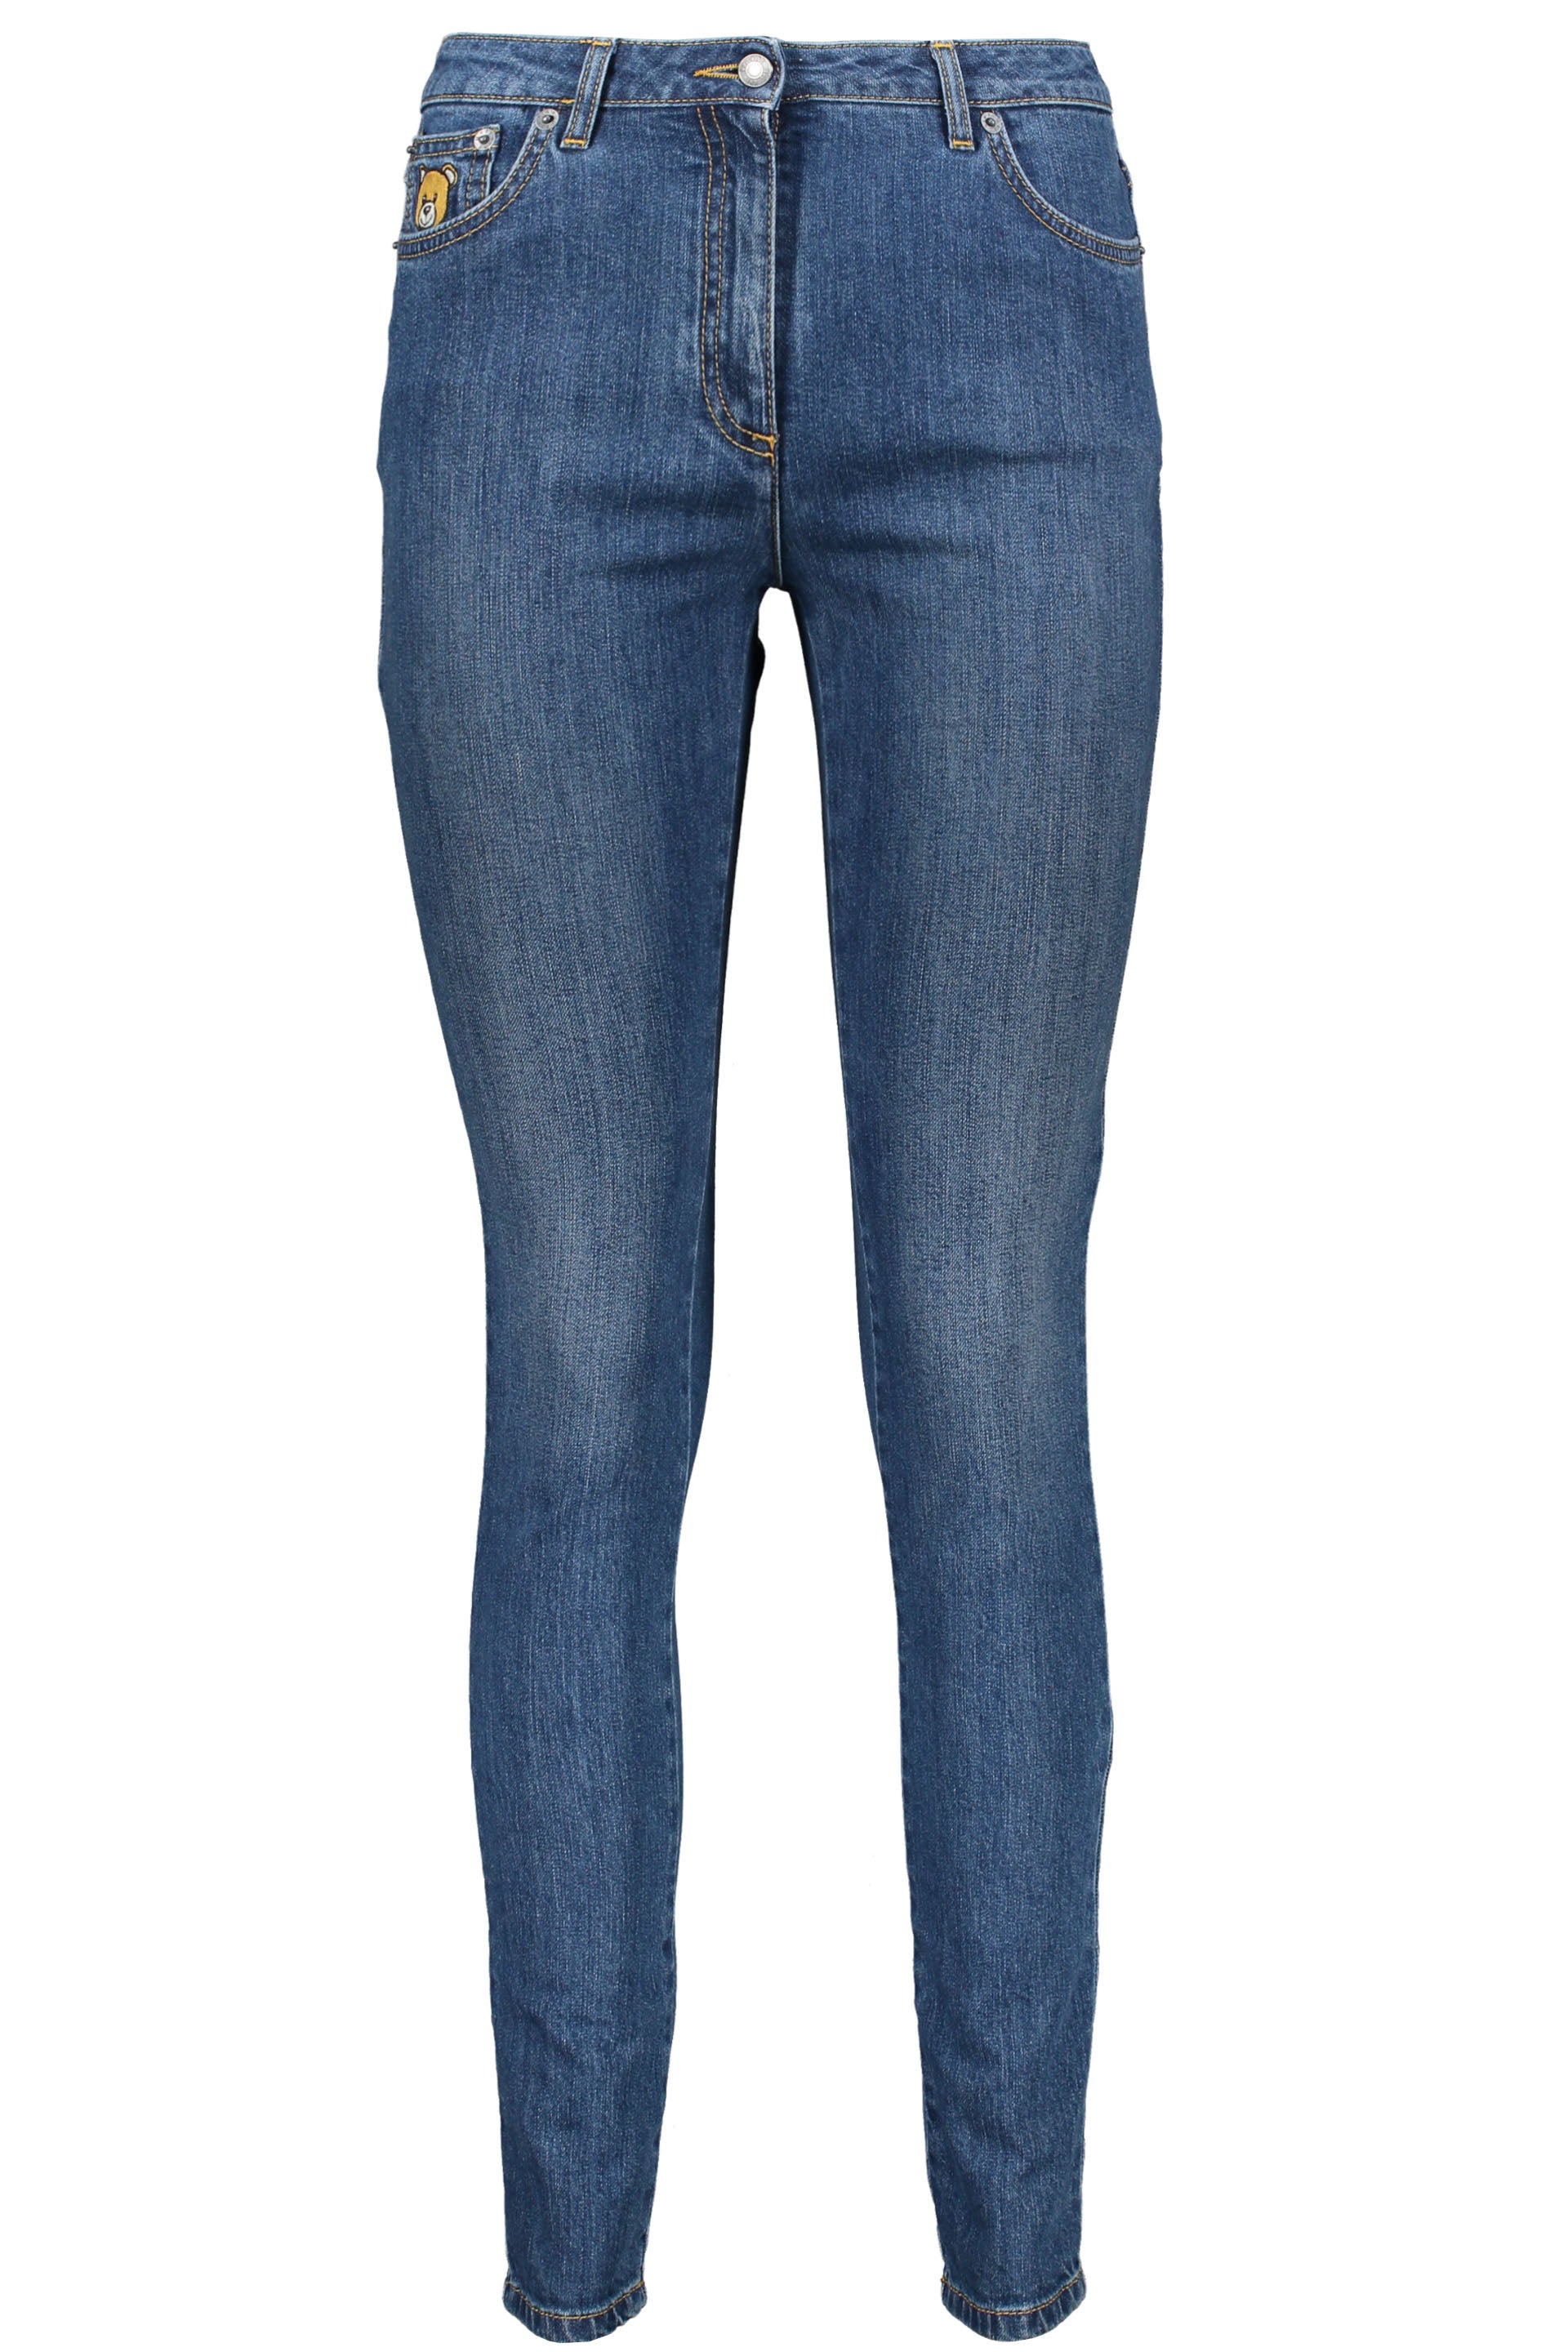 5-pocket skinny jeans-Moschino-OUTLET-SALE-36-ARCHIVIST